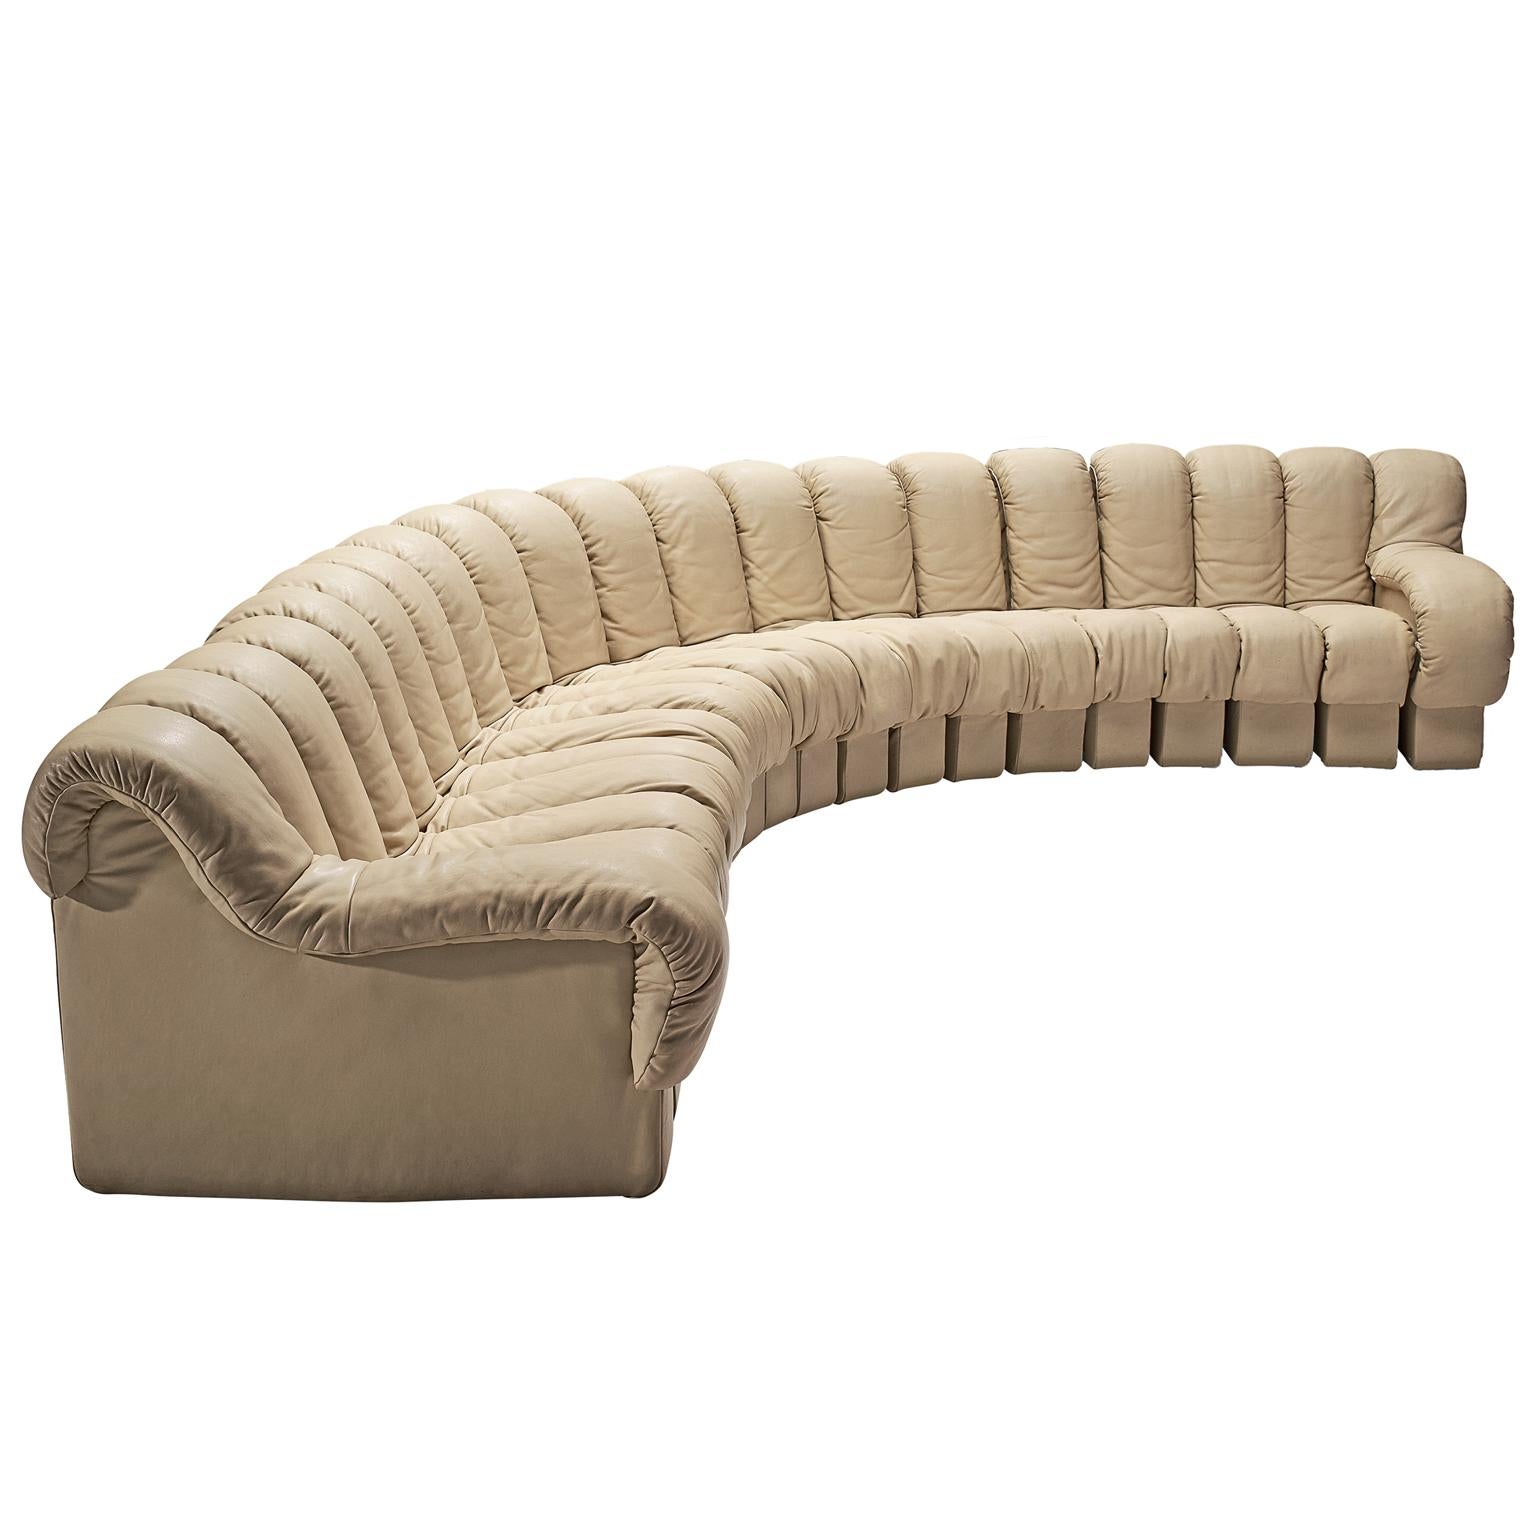 De Sede 'Snake' DS-600 Non Stop Sofa in Sand Leather